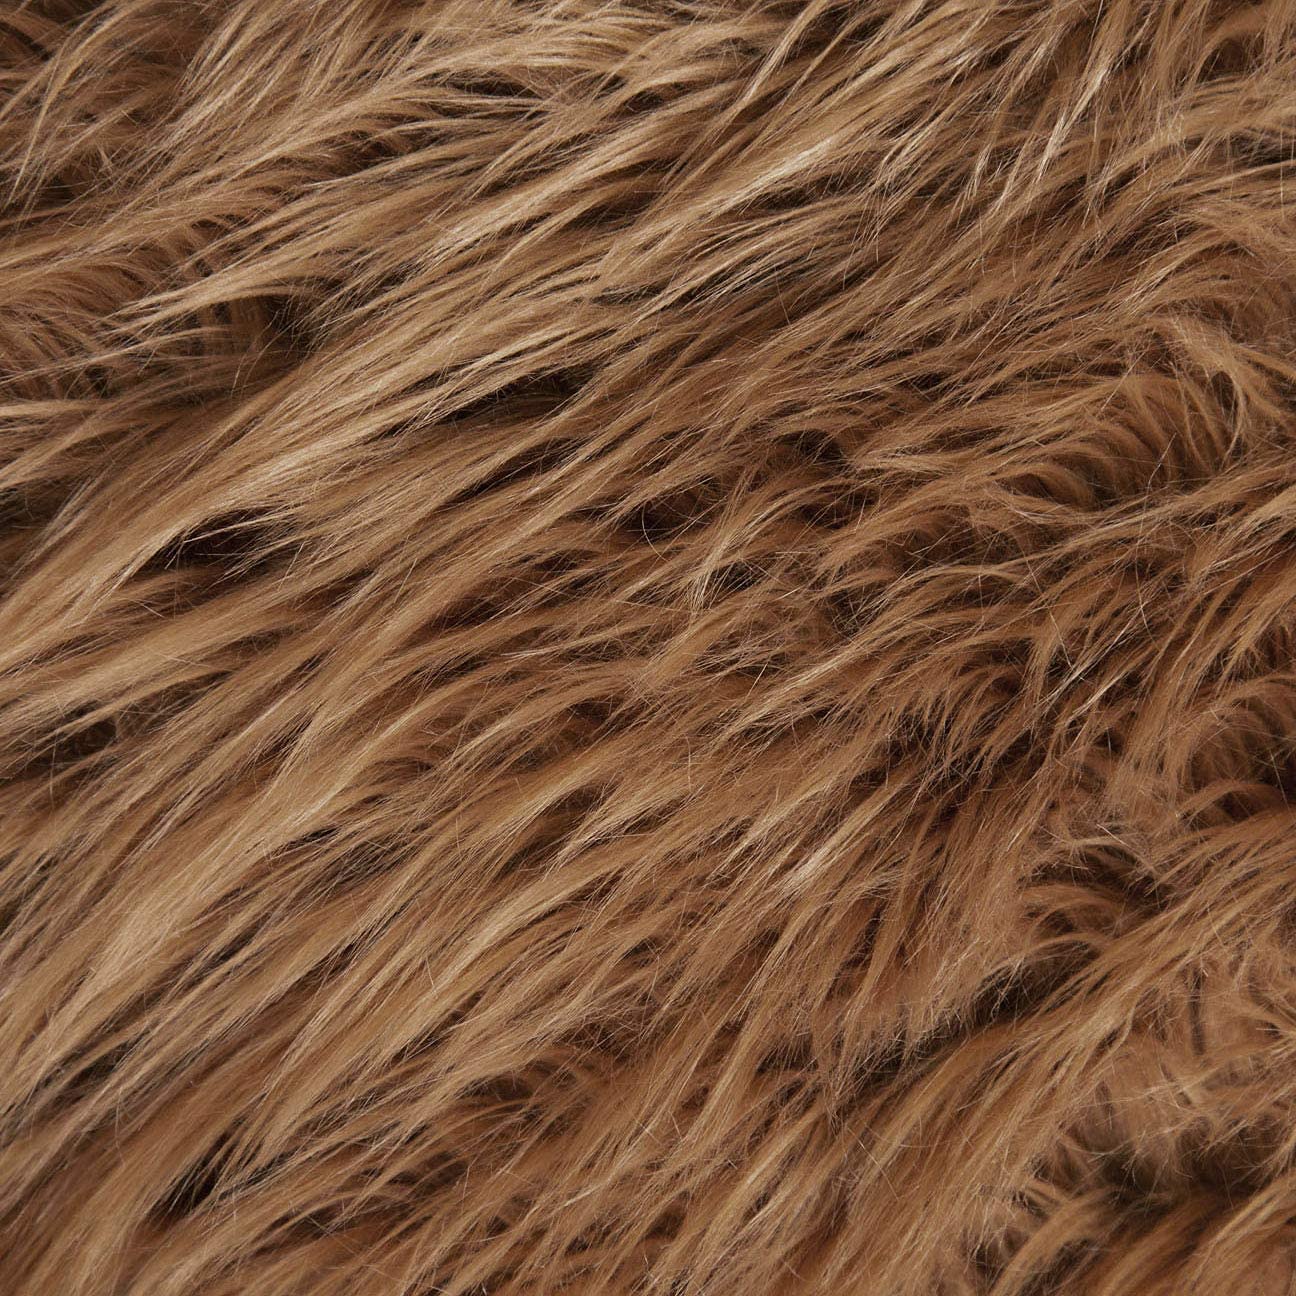 FabricLA Shaggy Faux Fur Fabric by The Yard - 18 x 60 Inches (45 cm x 150 cm) - 2.5 inch Pile Length - Craft Furry Fabric for Sewing Apparel, Rugs